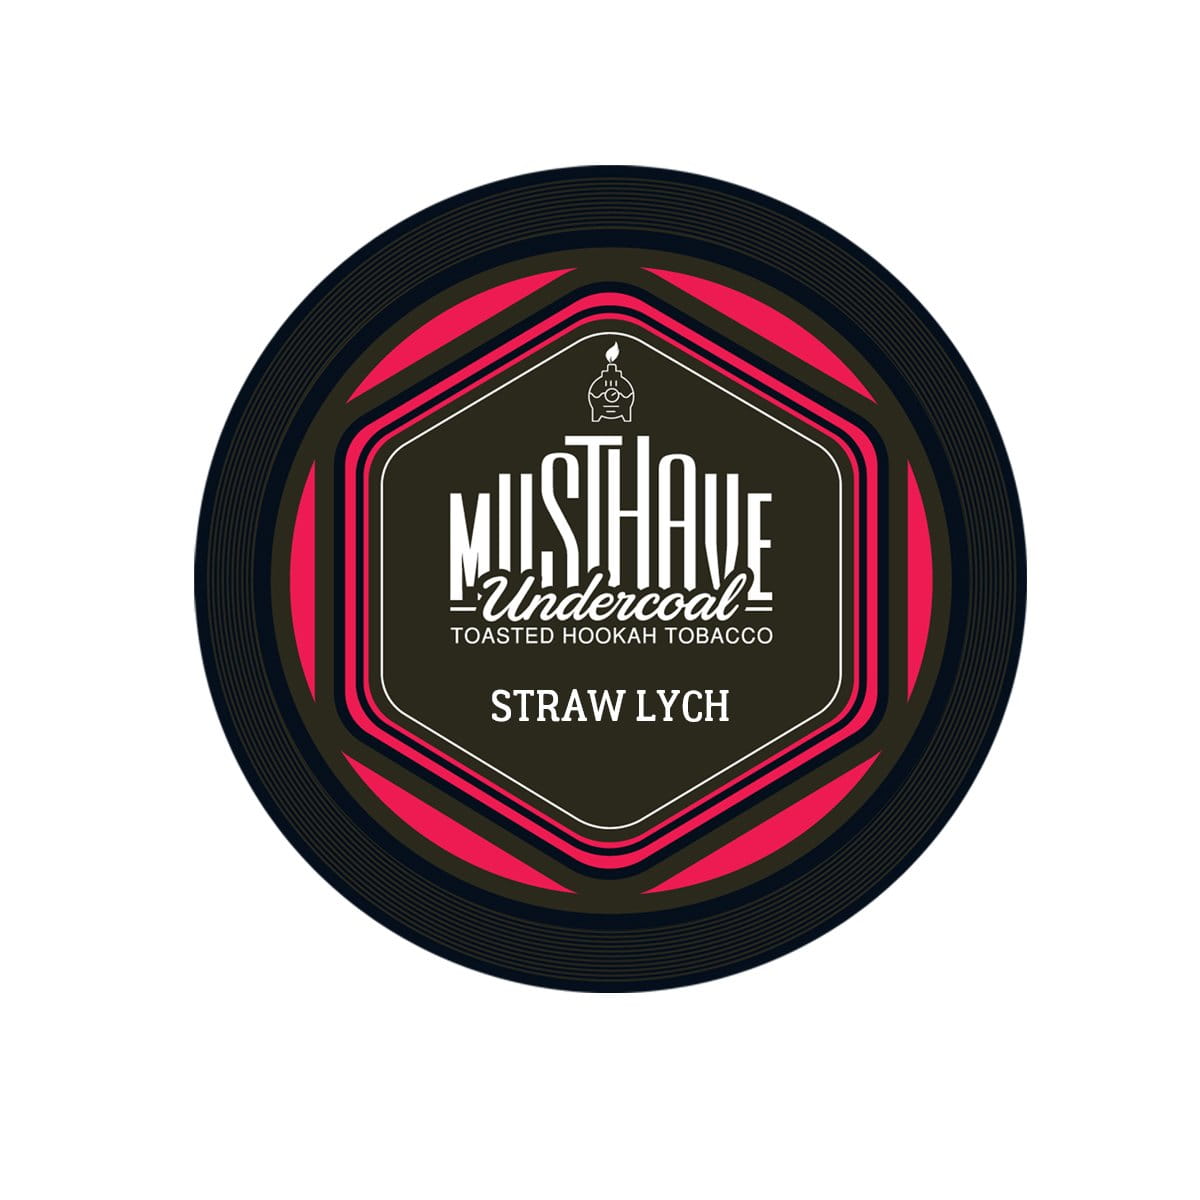 Musthave Tobacco - Straw Lych 25g